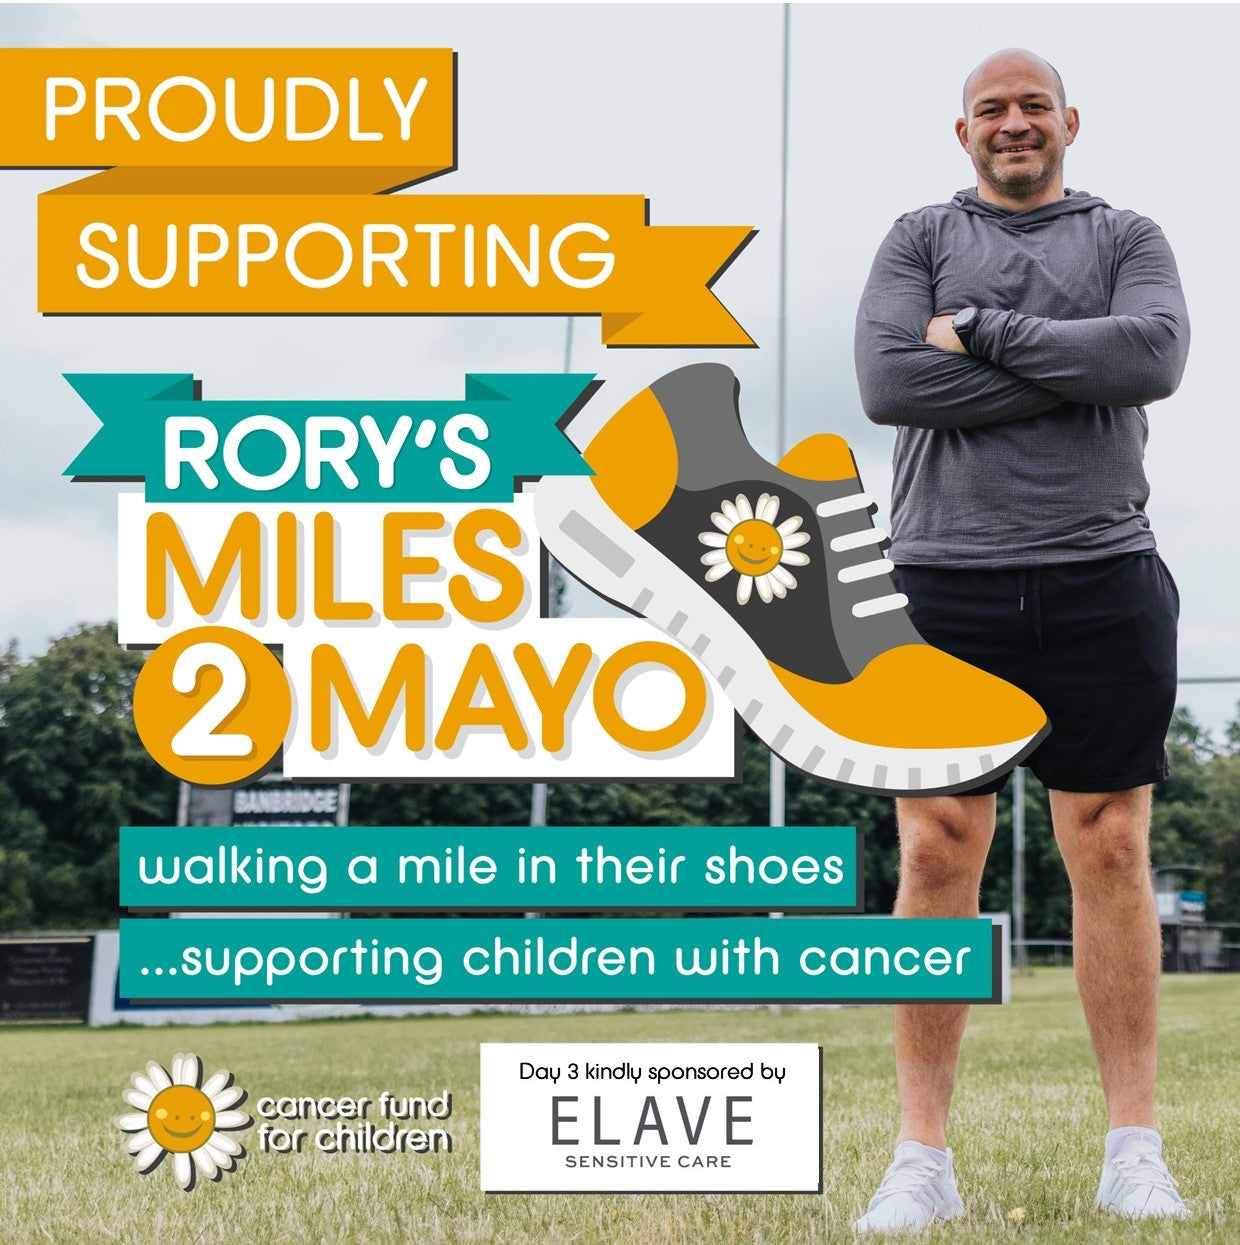 Elave Skincare supports Rugby Legend Rory Best - Miles2Mayo Challenge for Children with Cancer